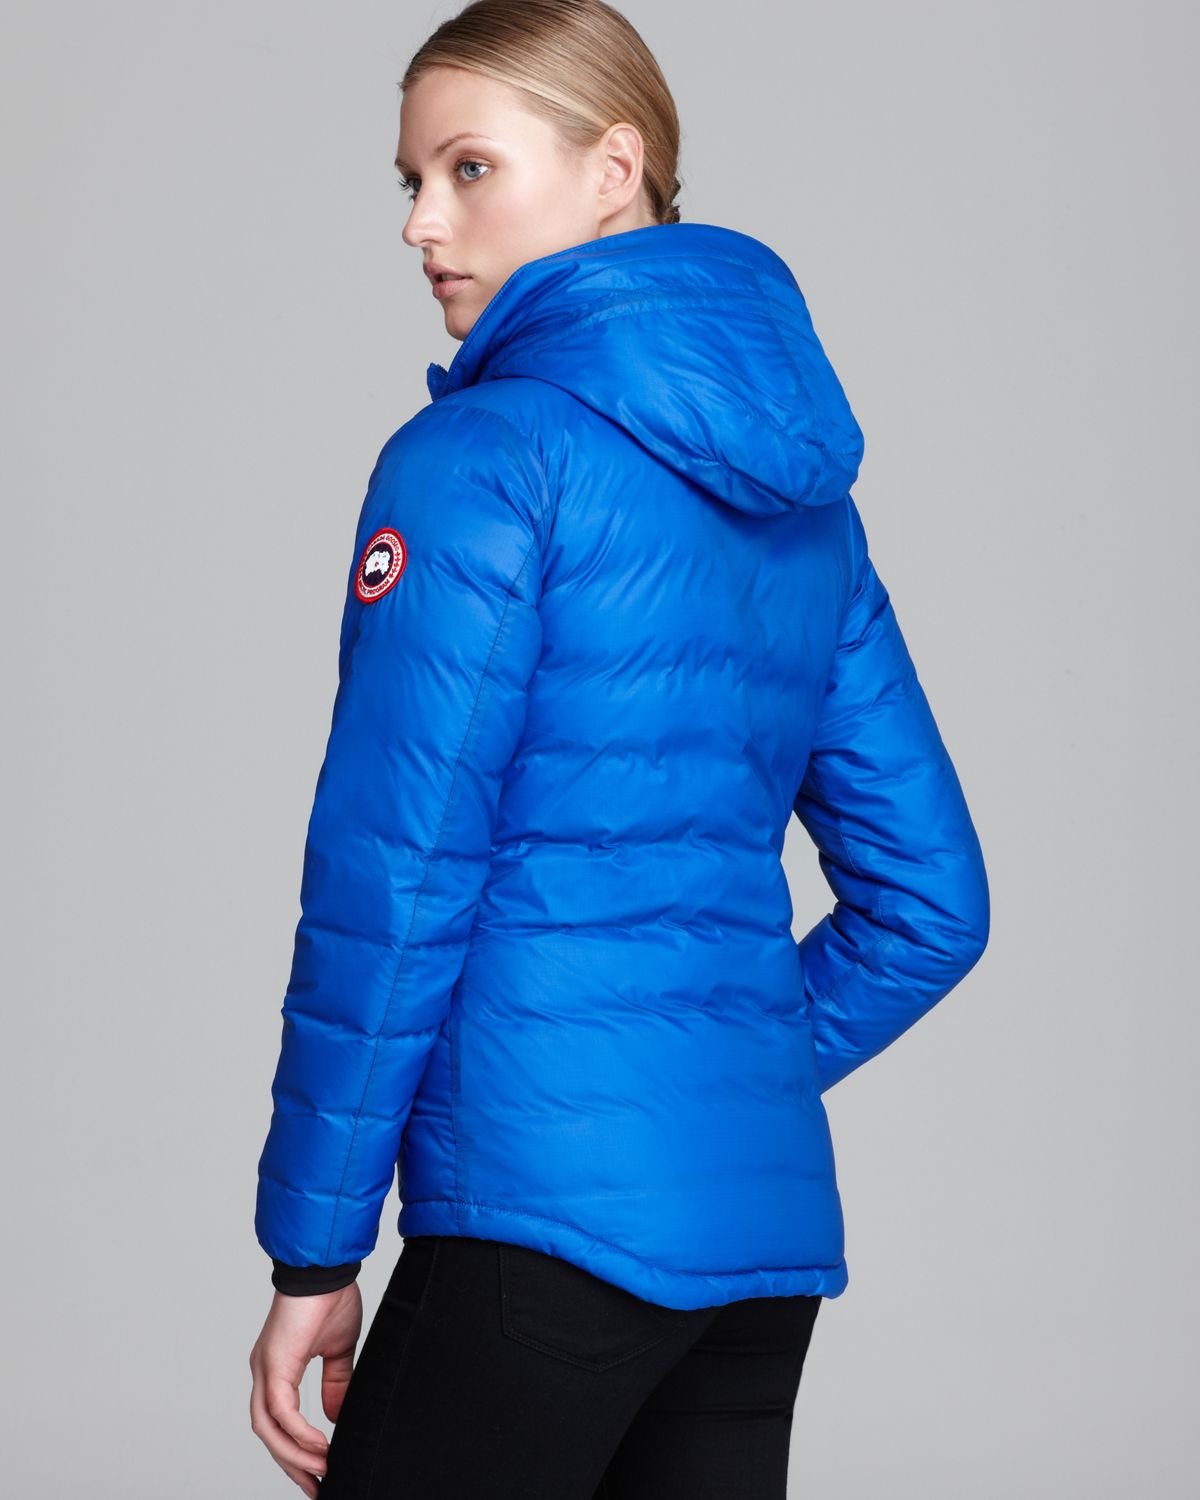 Lyst - Canada Goose Down Coat Pbi Camp Hooded Lightweight in Blue